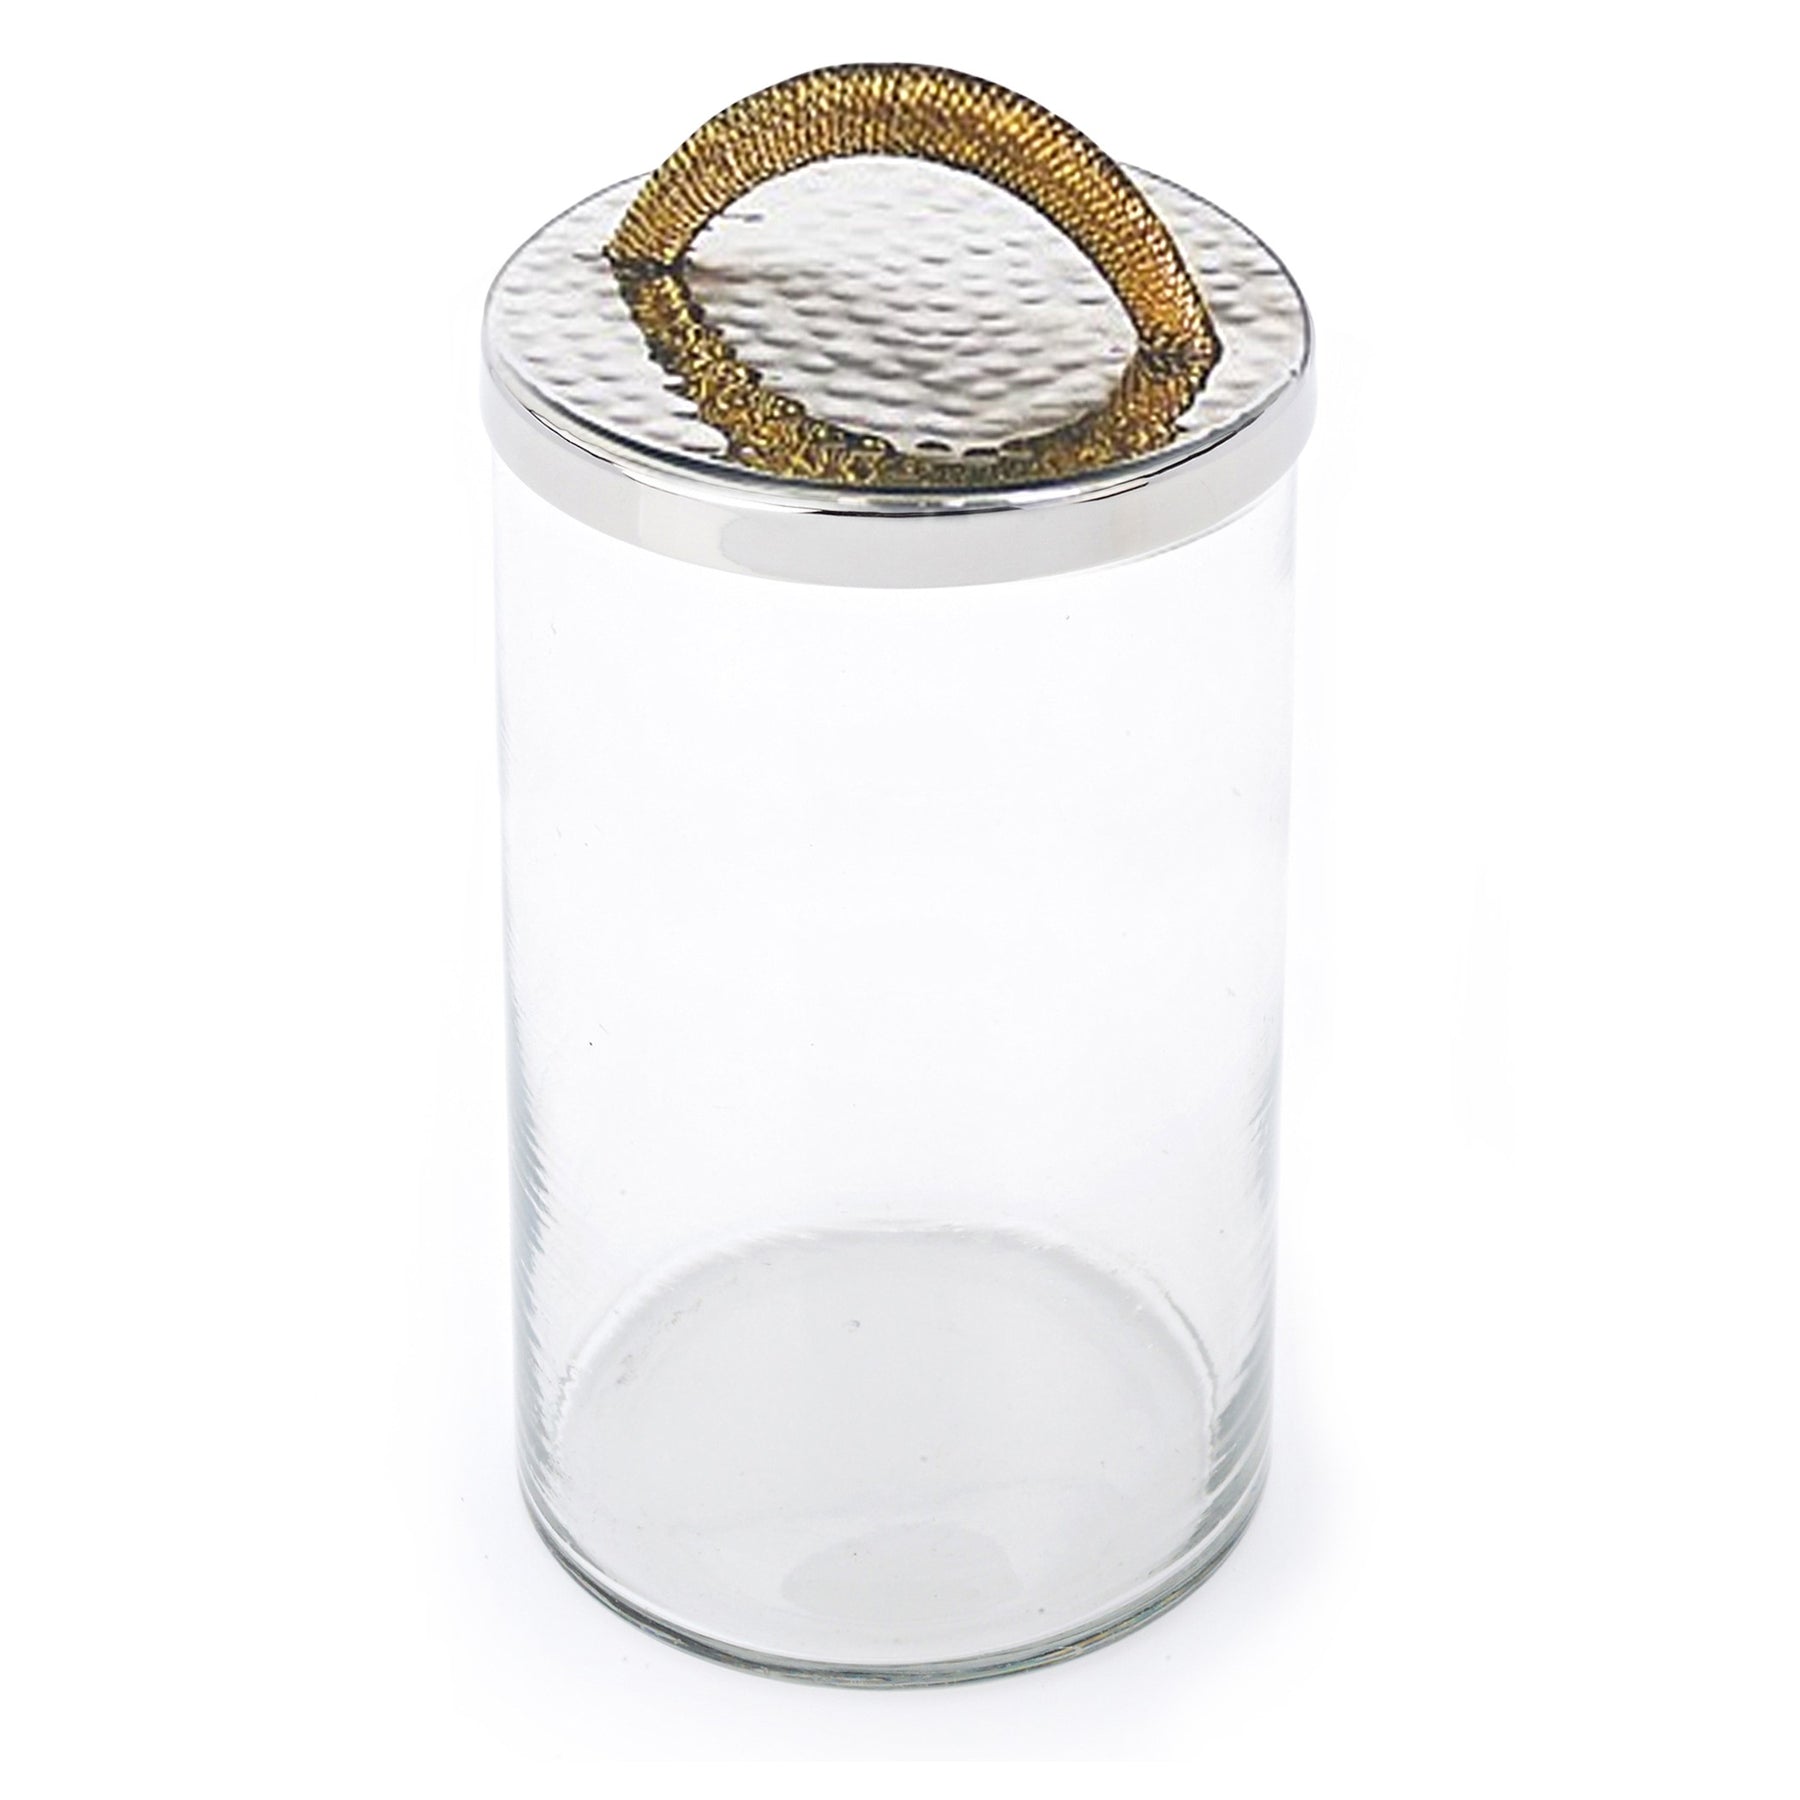 Classic Touch MSGJ59 Glass Jar with Stainless Steel Lid and Gold Handle, Medium (4" x 6.5")